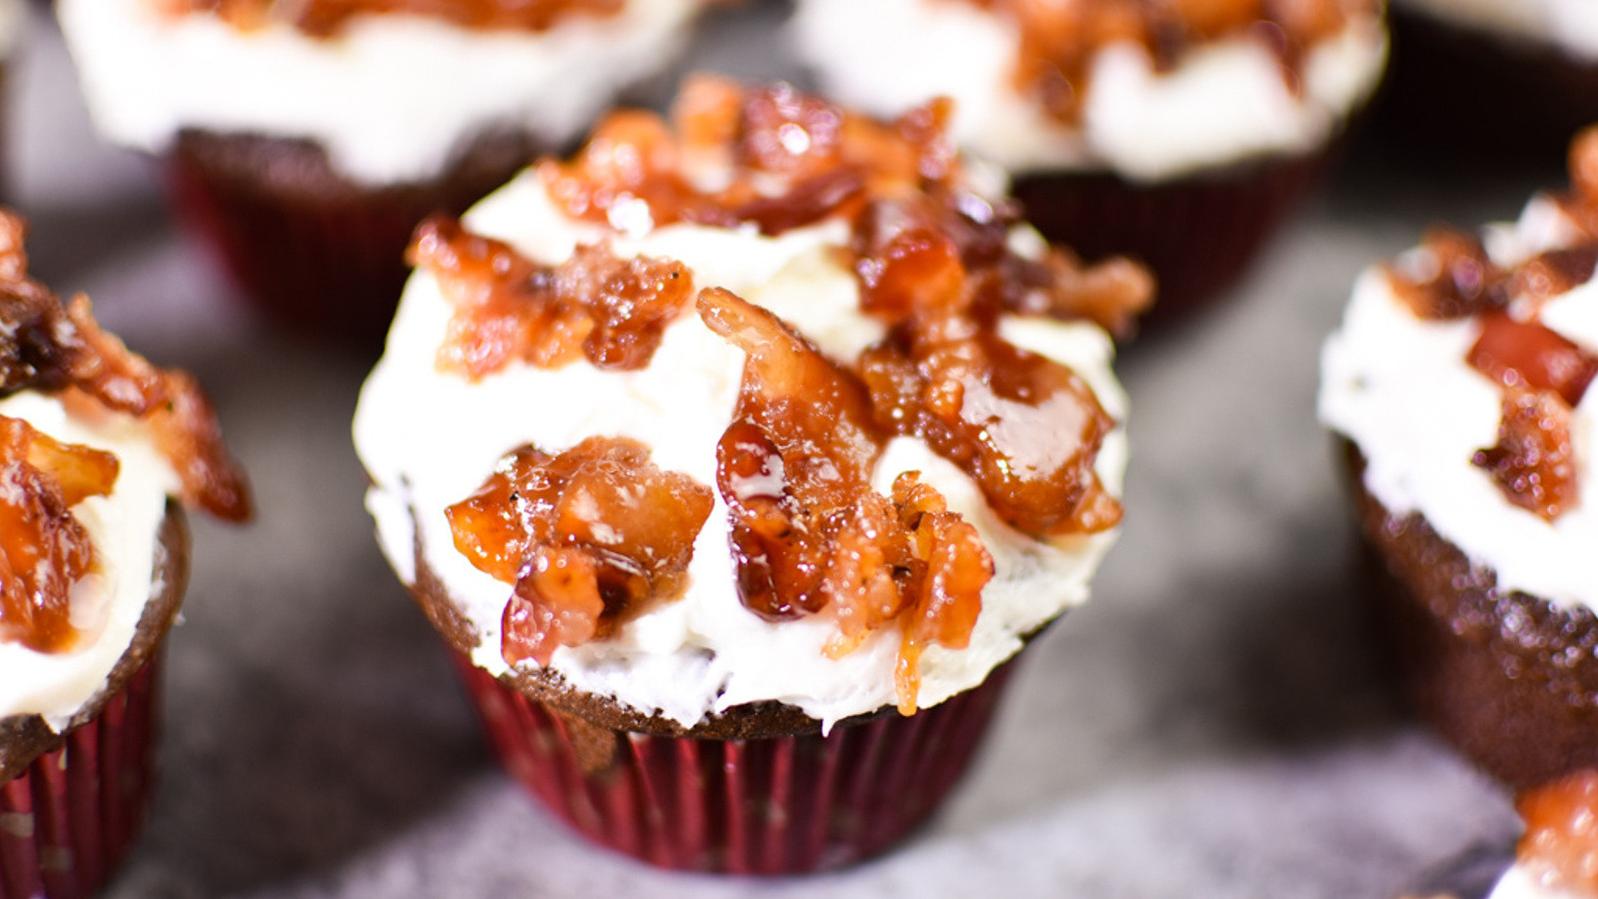  Bacon in a cupcake? Yes, please!